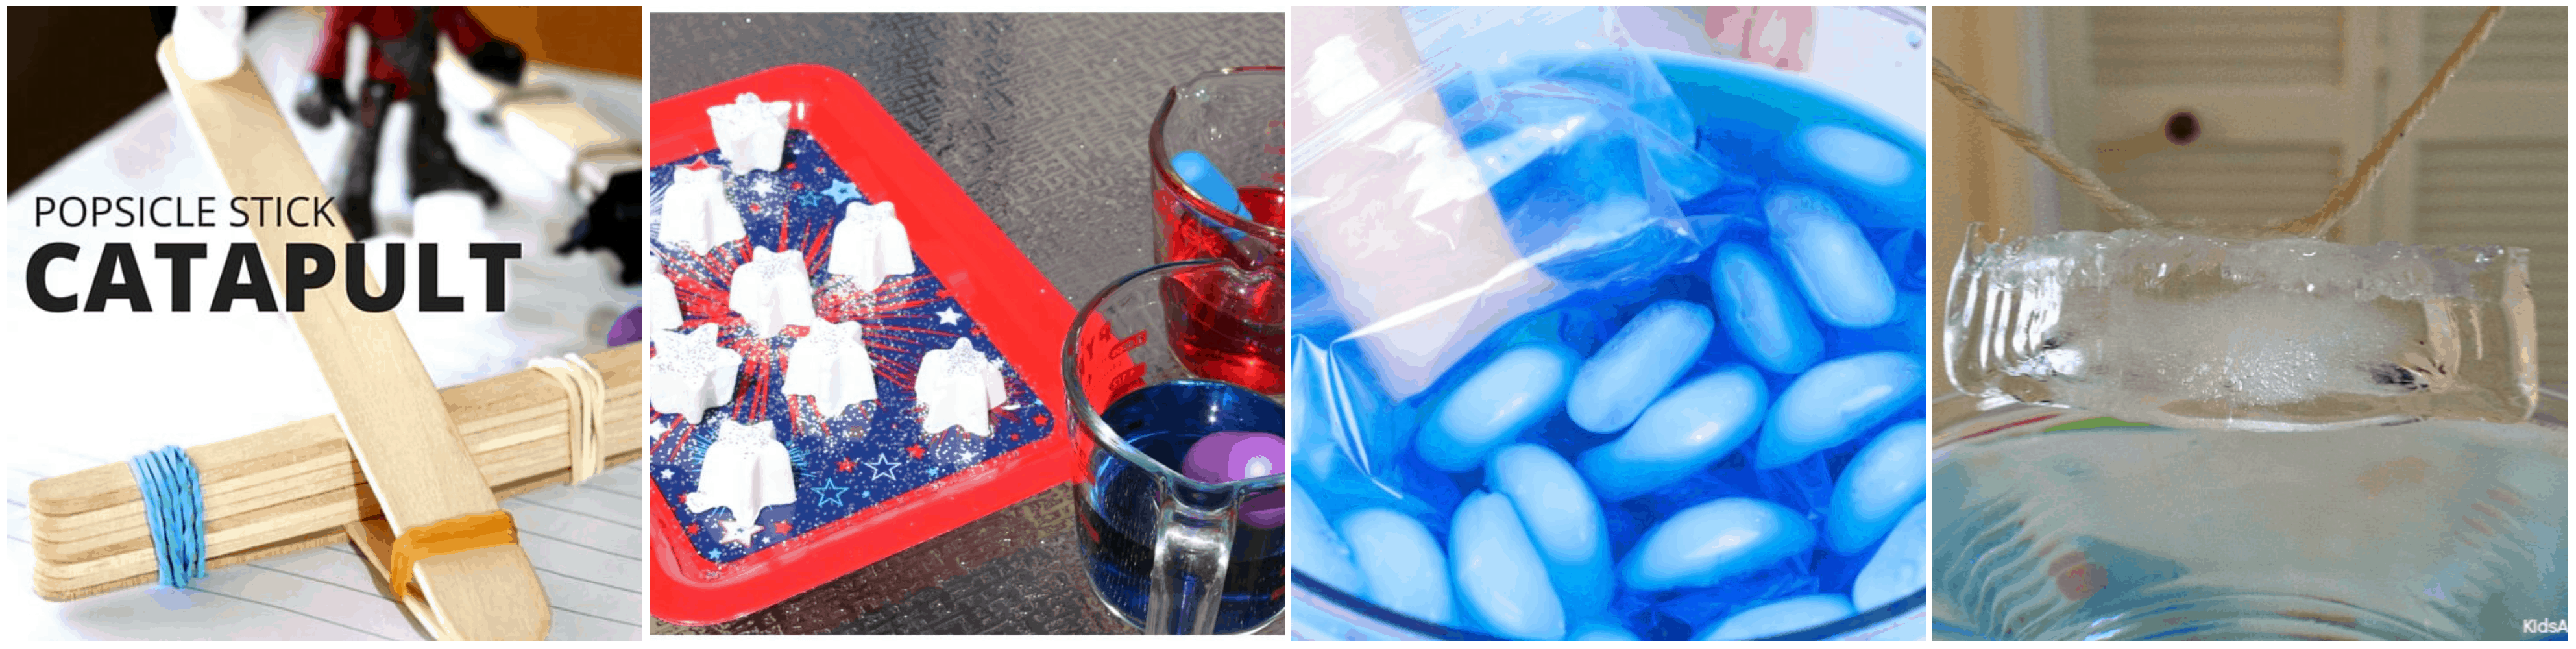 Your little scientist will be entertained all summer with these easy sceince experiments!